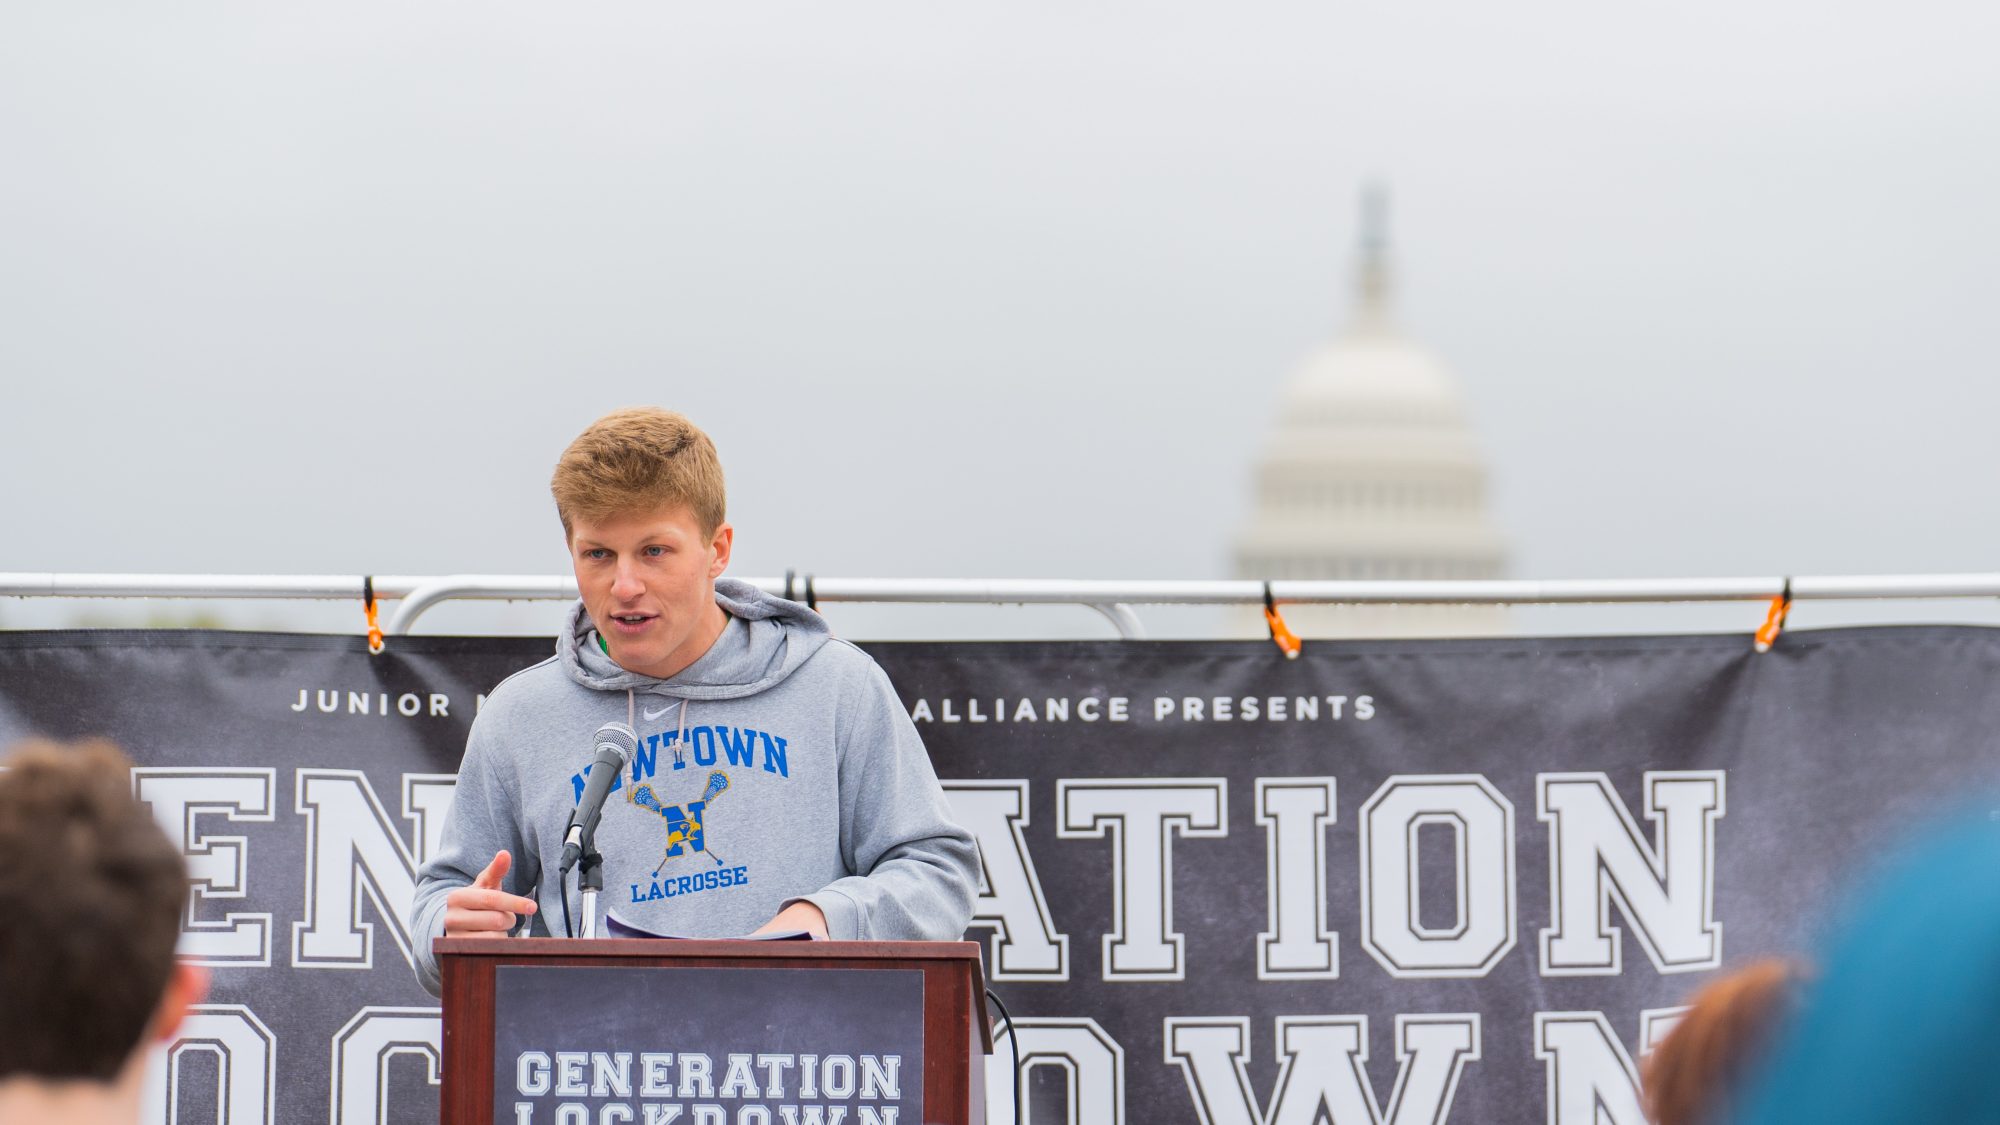 Jackson Mittleman (C&#039;23) speaks at a rally for gun violence prevention. Behind him is a sign that says &quot;Generation Lockdown&quot; and the U.S. Capitol is in the foreground.